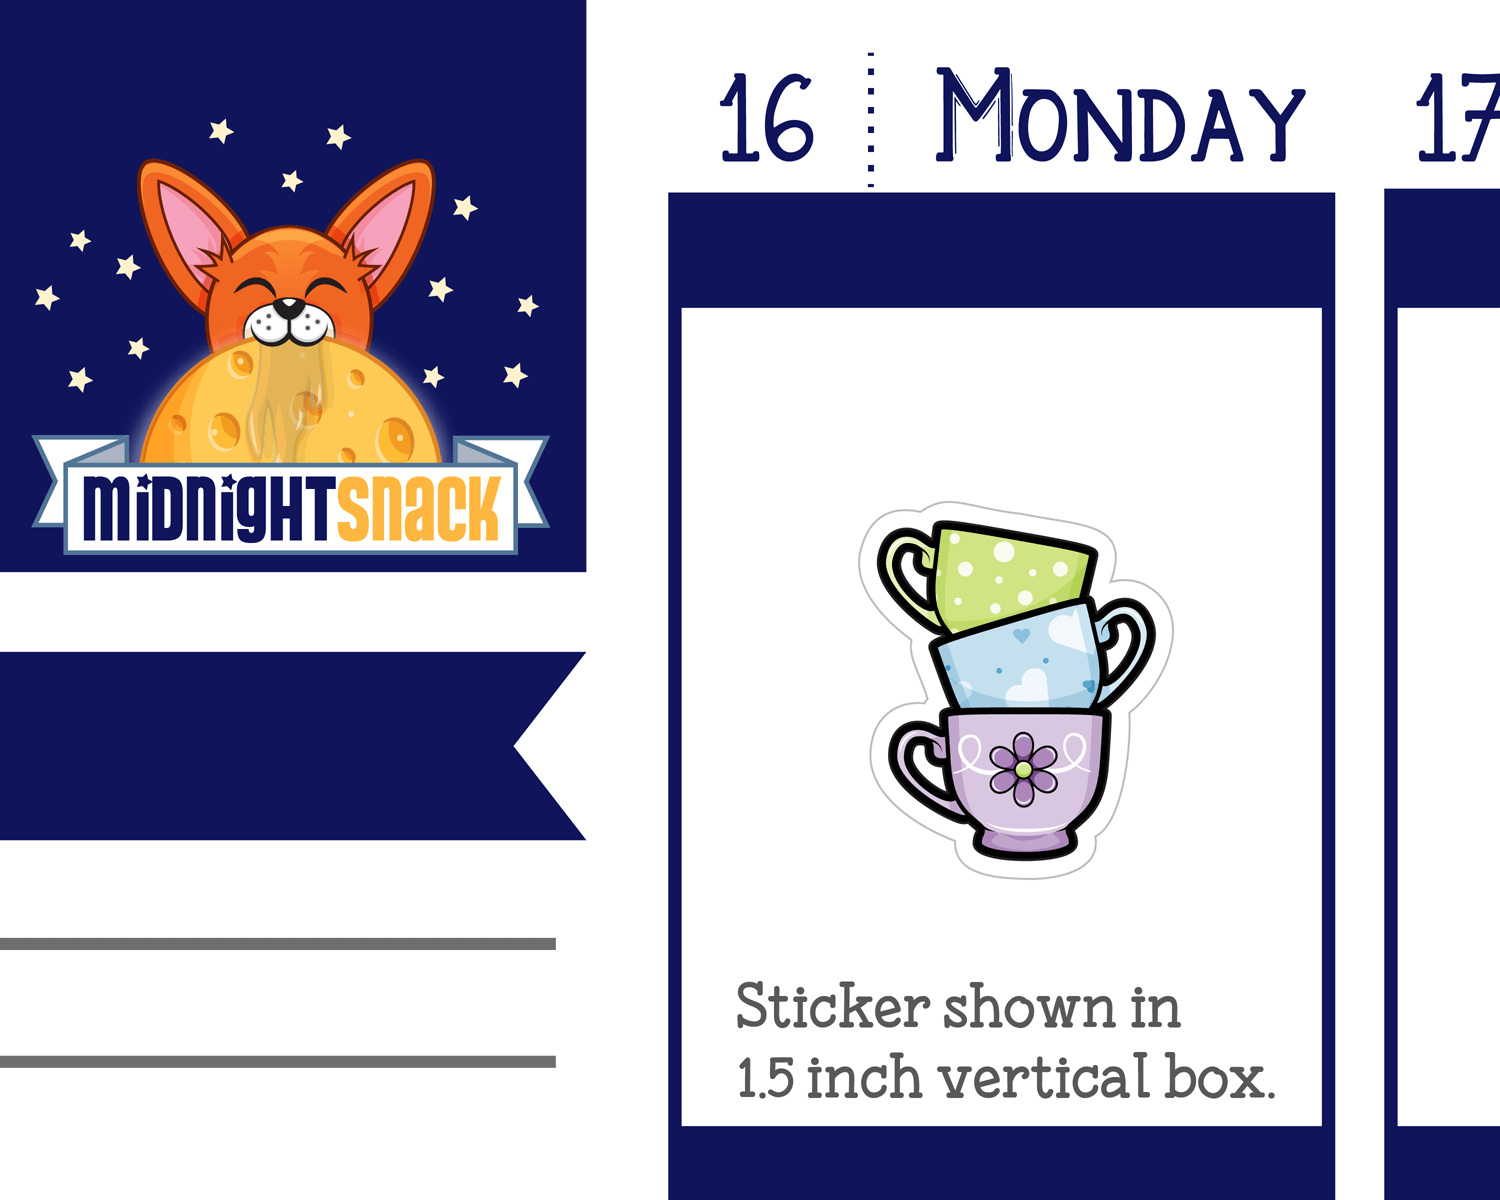 Stacked Tea Cups Icon: Planner Stickers